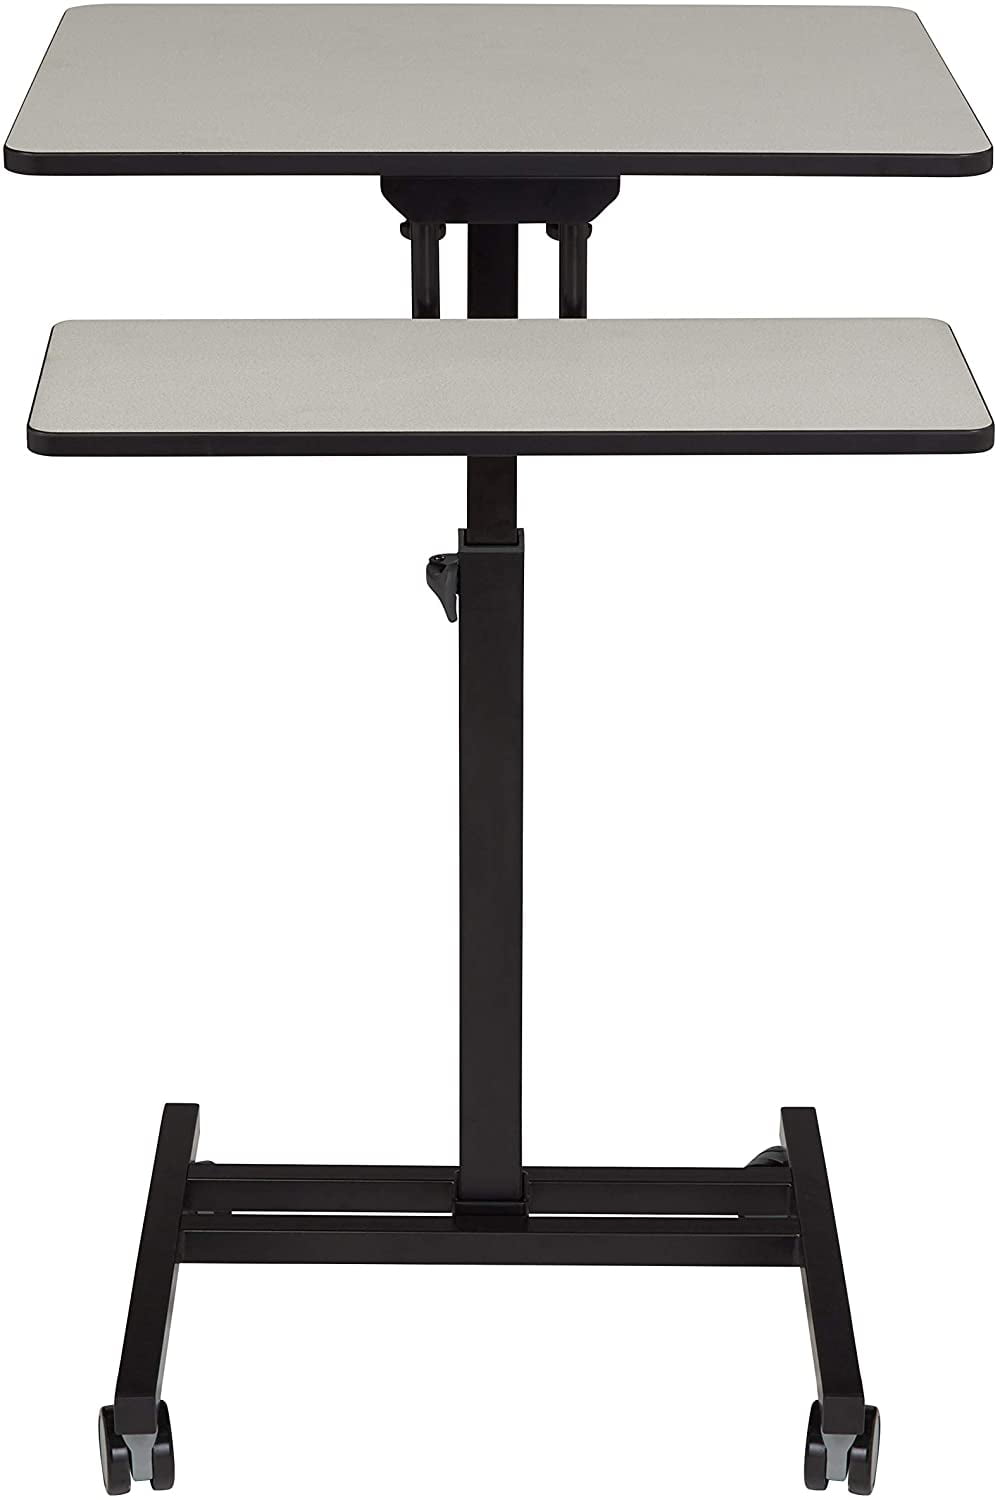 Oklahoma Sound Work from Home Sit-Stand Mobile Desk 